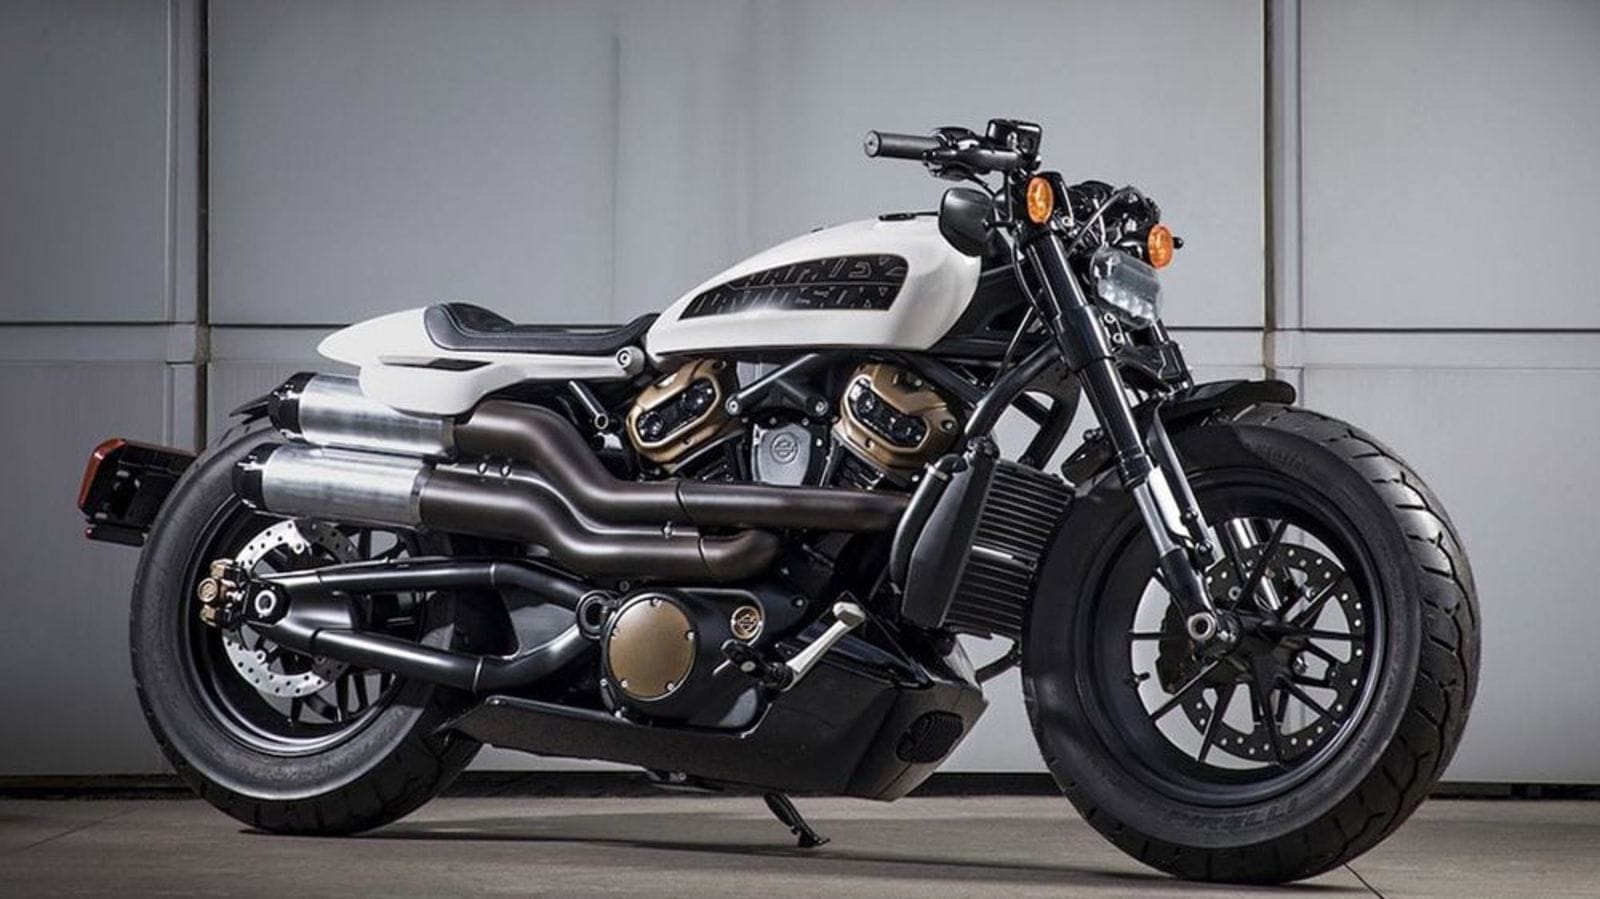 Harley Davidson announces lineup of upcoming new models for 2022 HT Auto